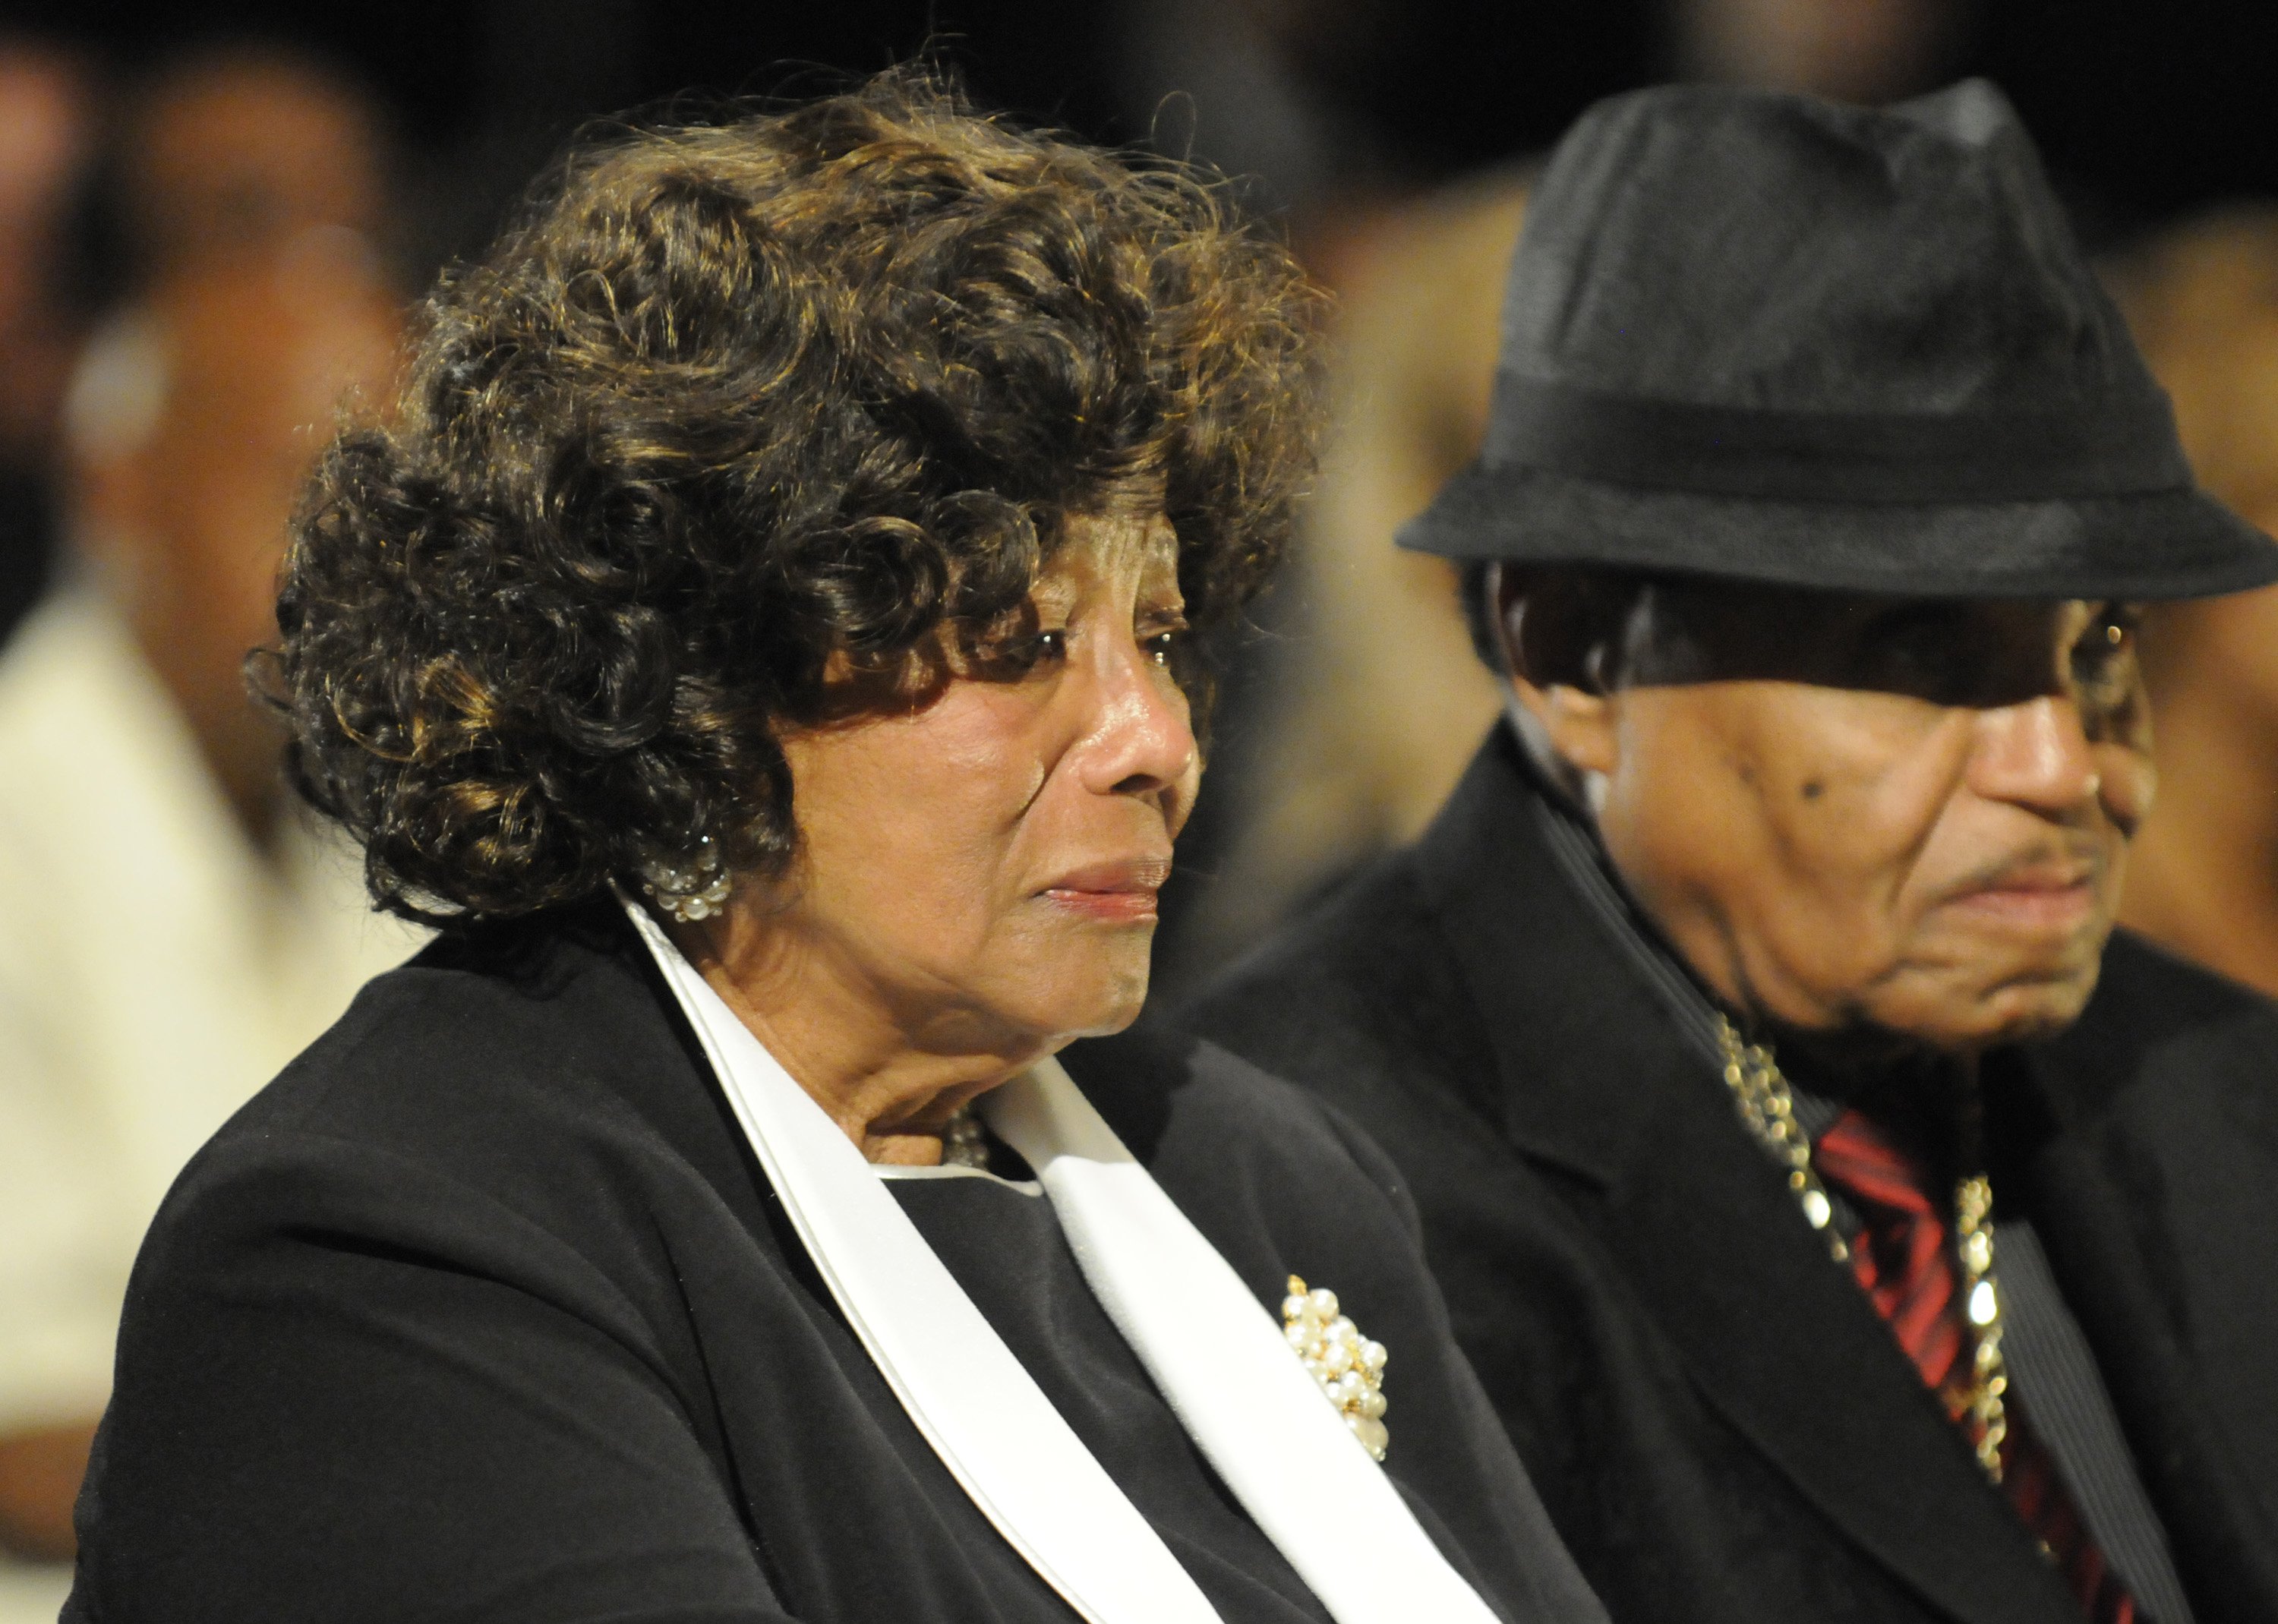 Katherine Jackson and Joe Jackson at Michael Jackson's funeral service at Glendale Forest Lawn Memorial Park on September 3, 2009, in Glendale, California. | Source: Getty Images